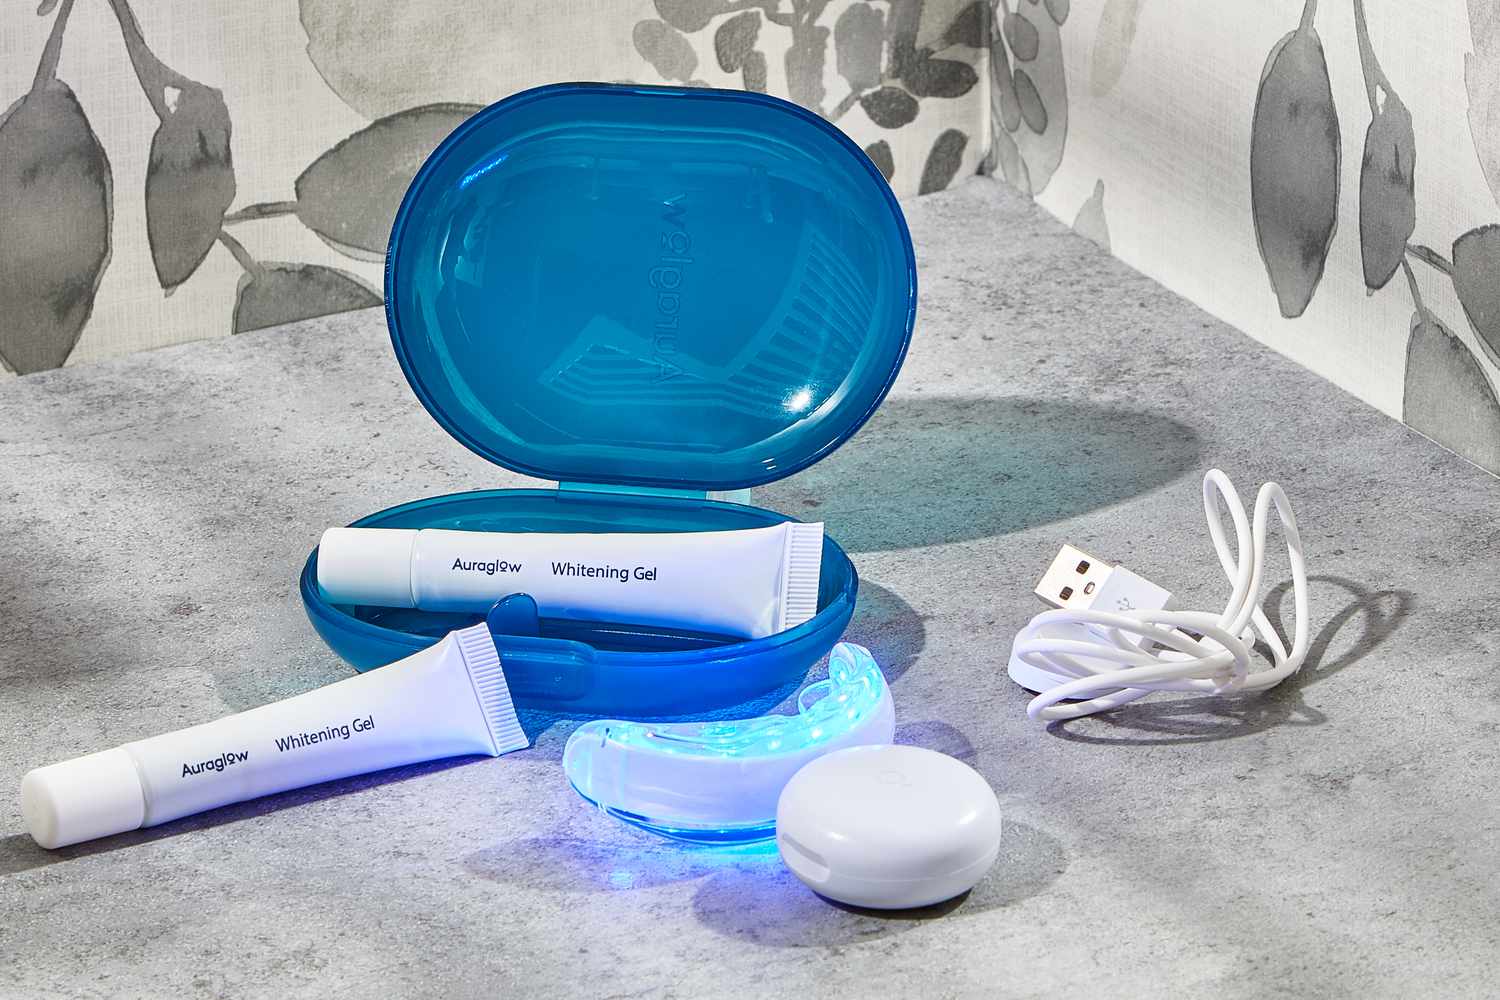 Auraglow Complete LED Whitening Kit displayed on a gray counter